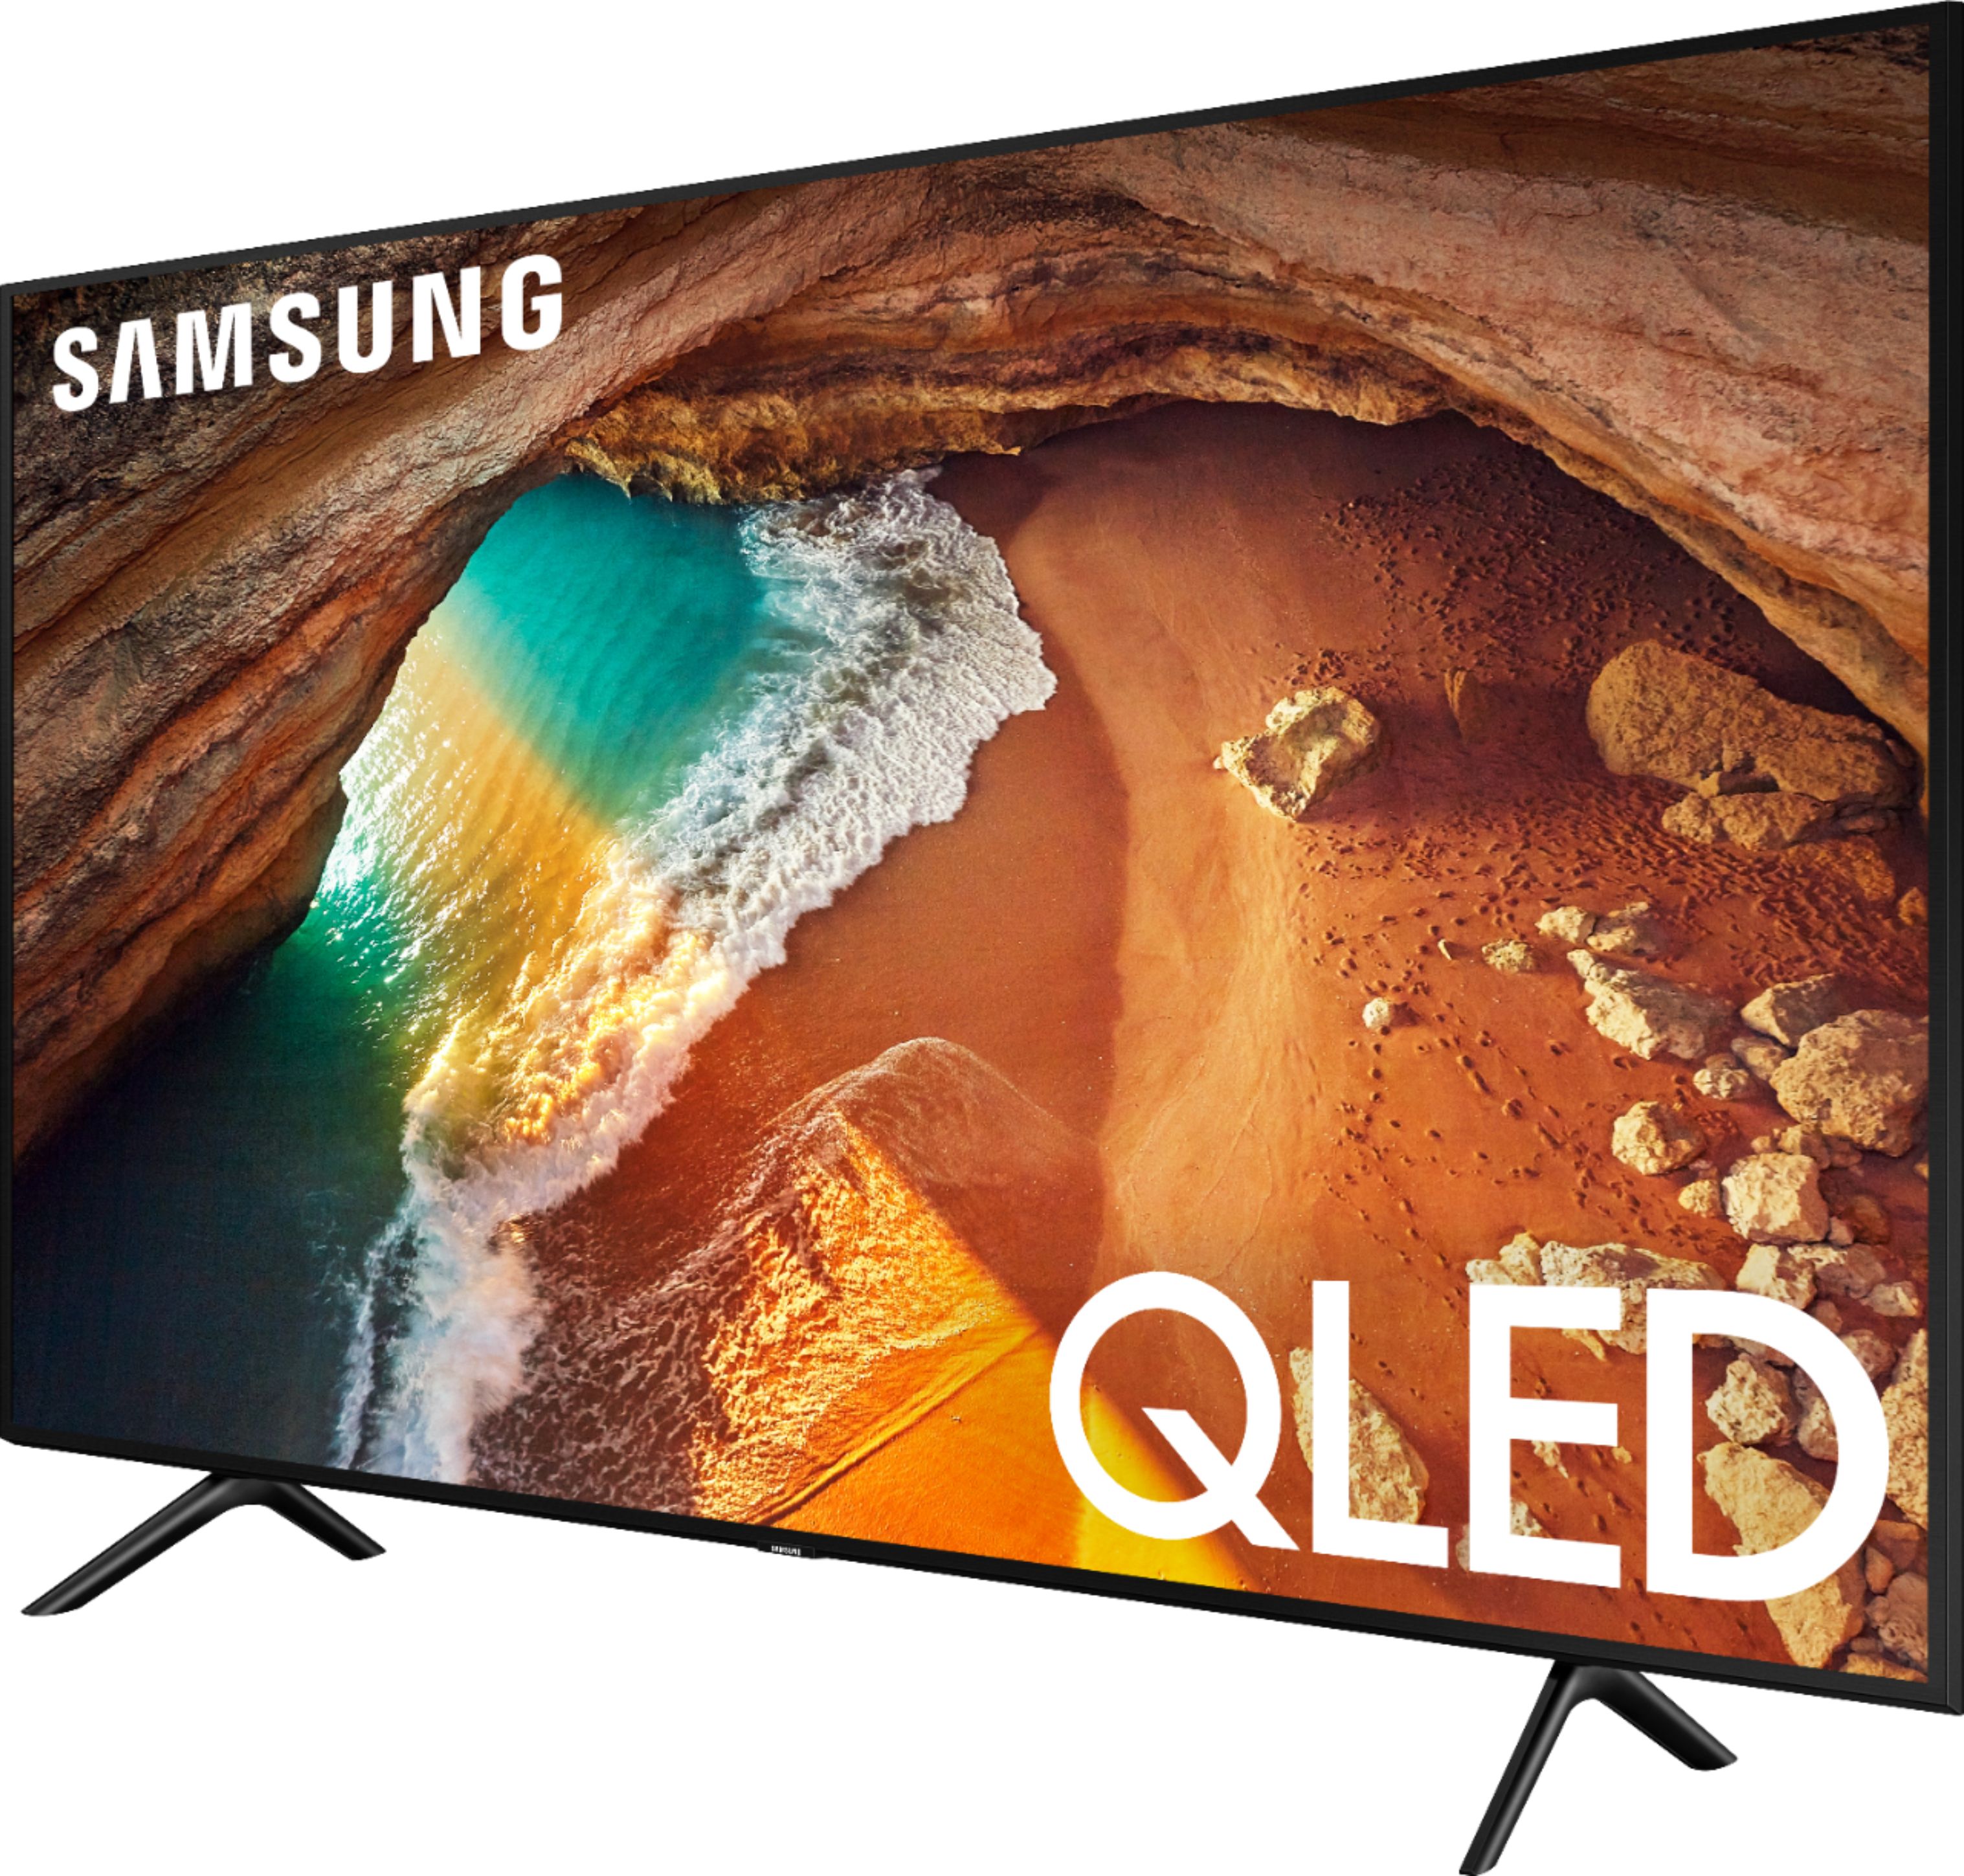 Questions and Answers Samsung 55" Class Q60 Series QLED 4K UHD Smart